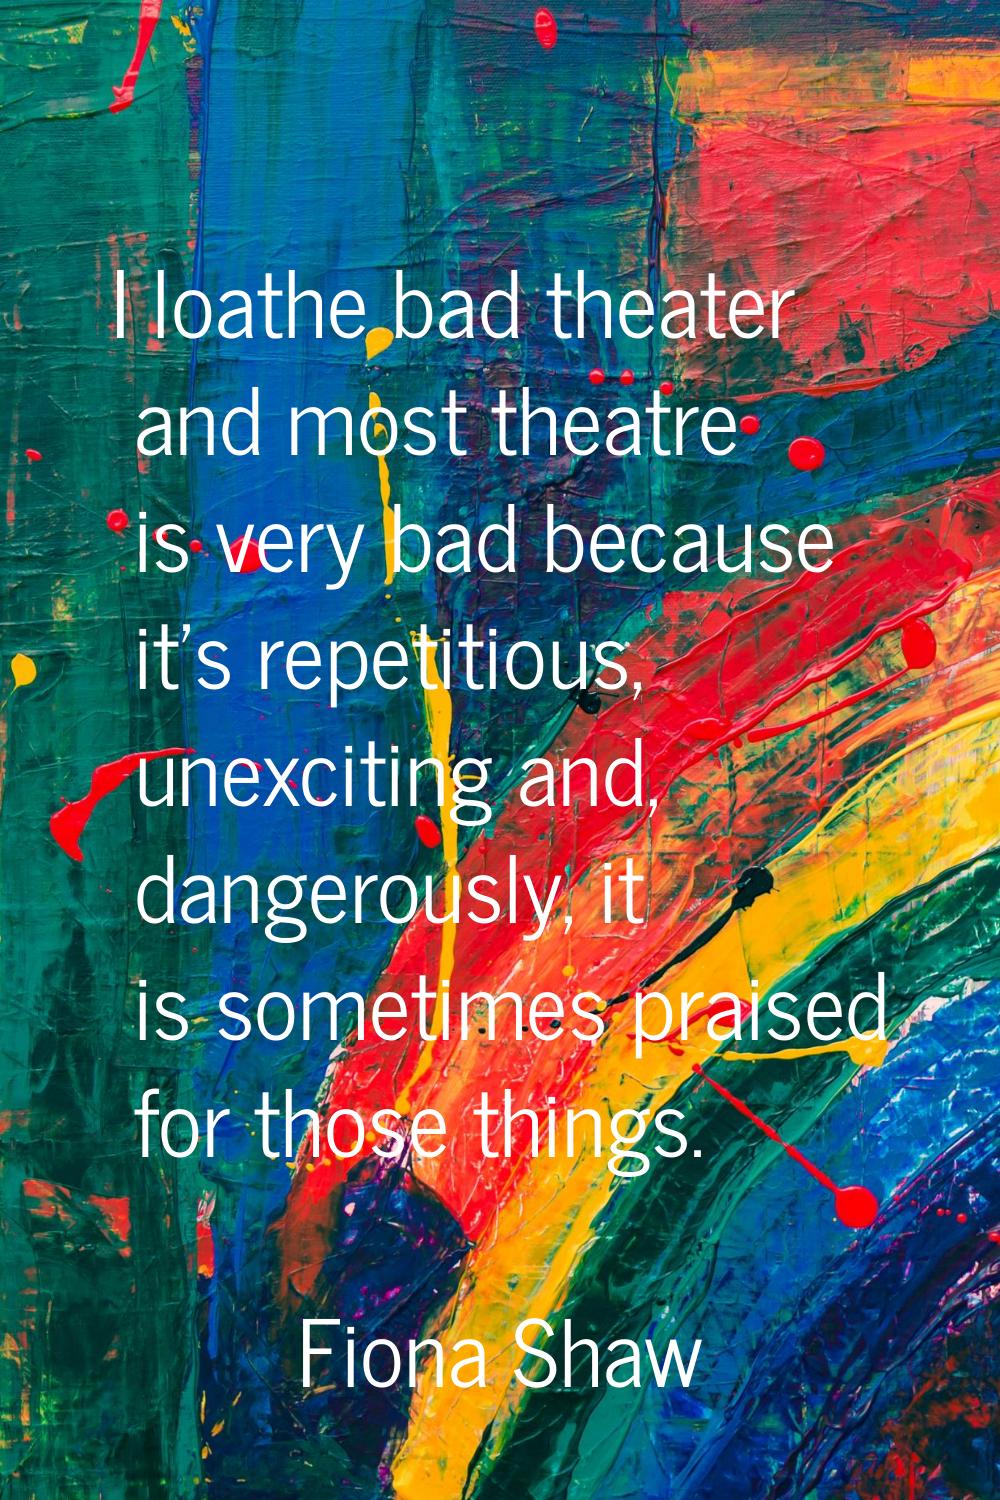 I loathe bad theater and most theatre is very bad because it's repetitious, unexciting and, dangero